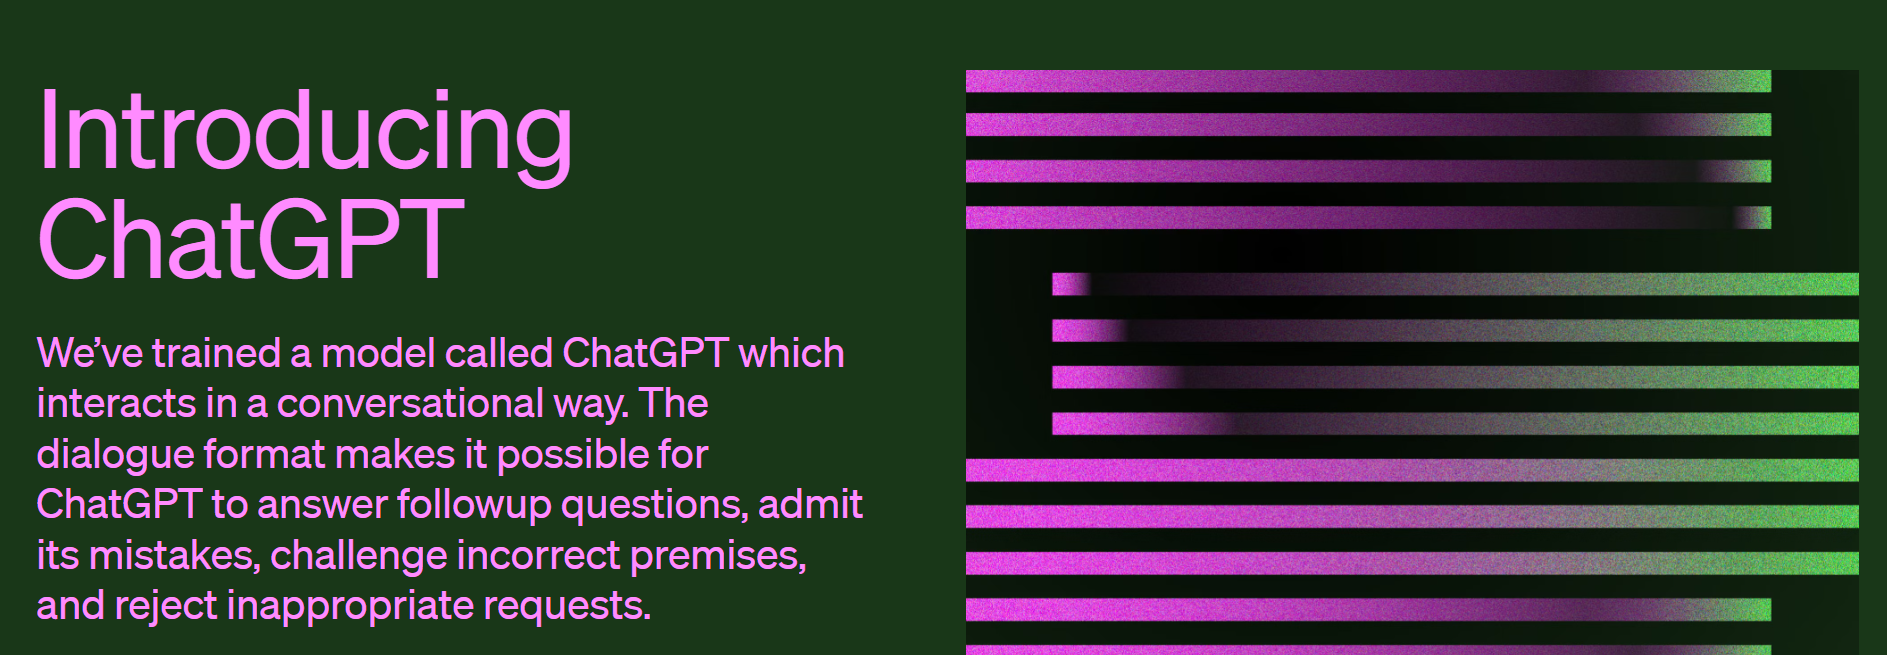 introducing-chat-gpt